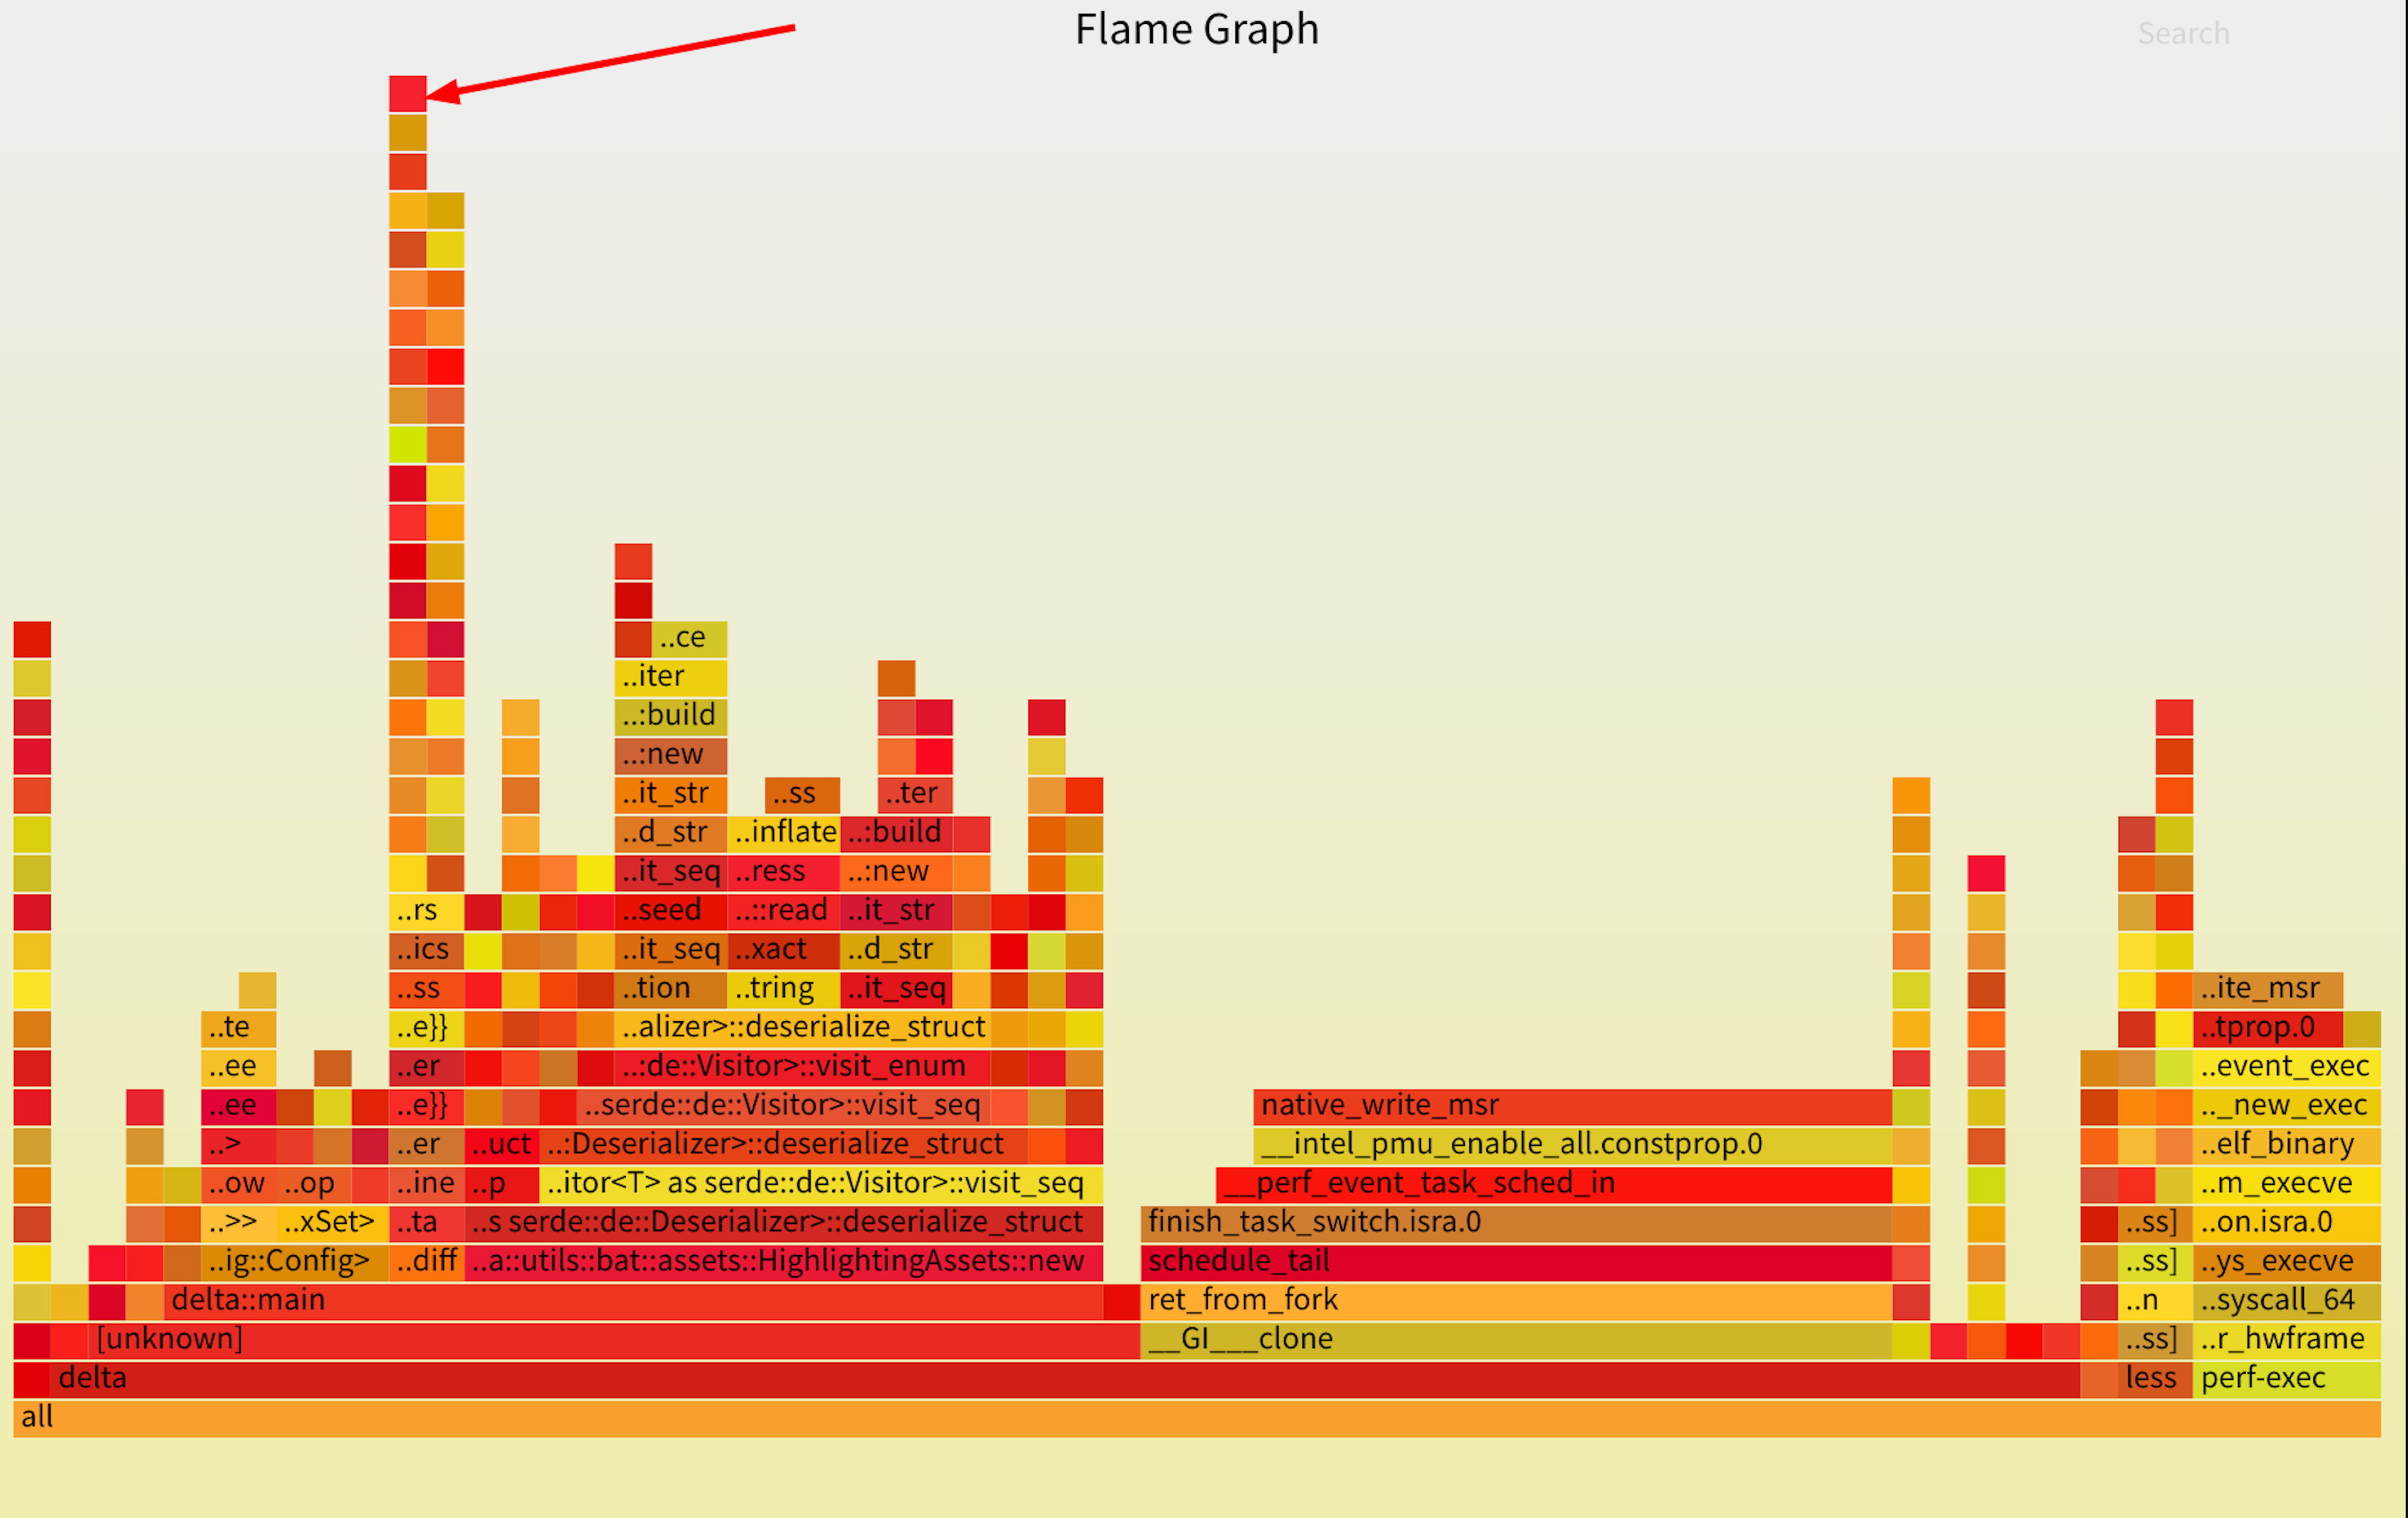 delta-flamegraph-overview-2021-12-21_01-35.png